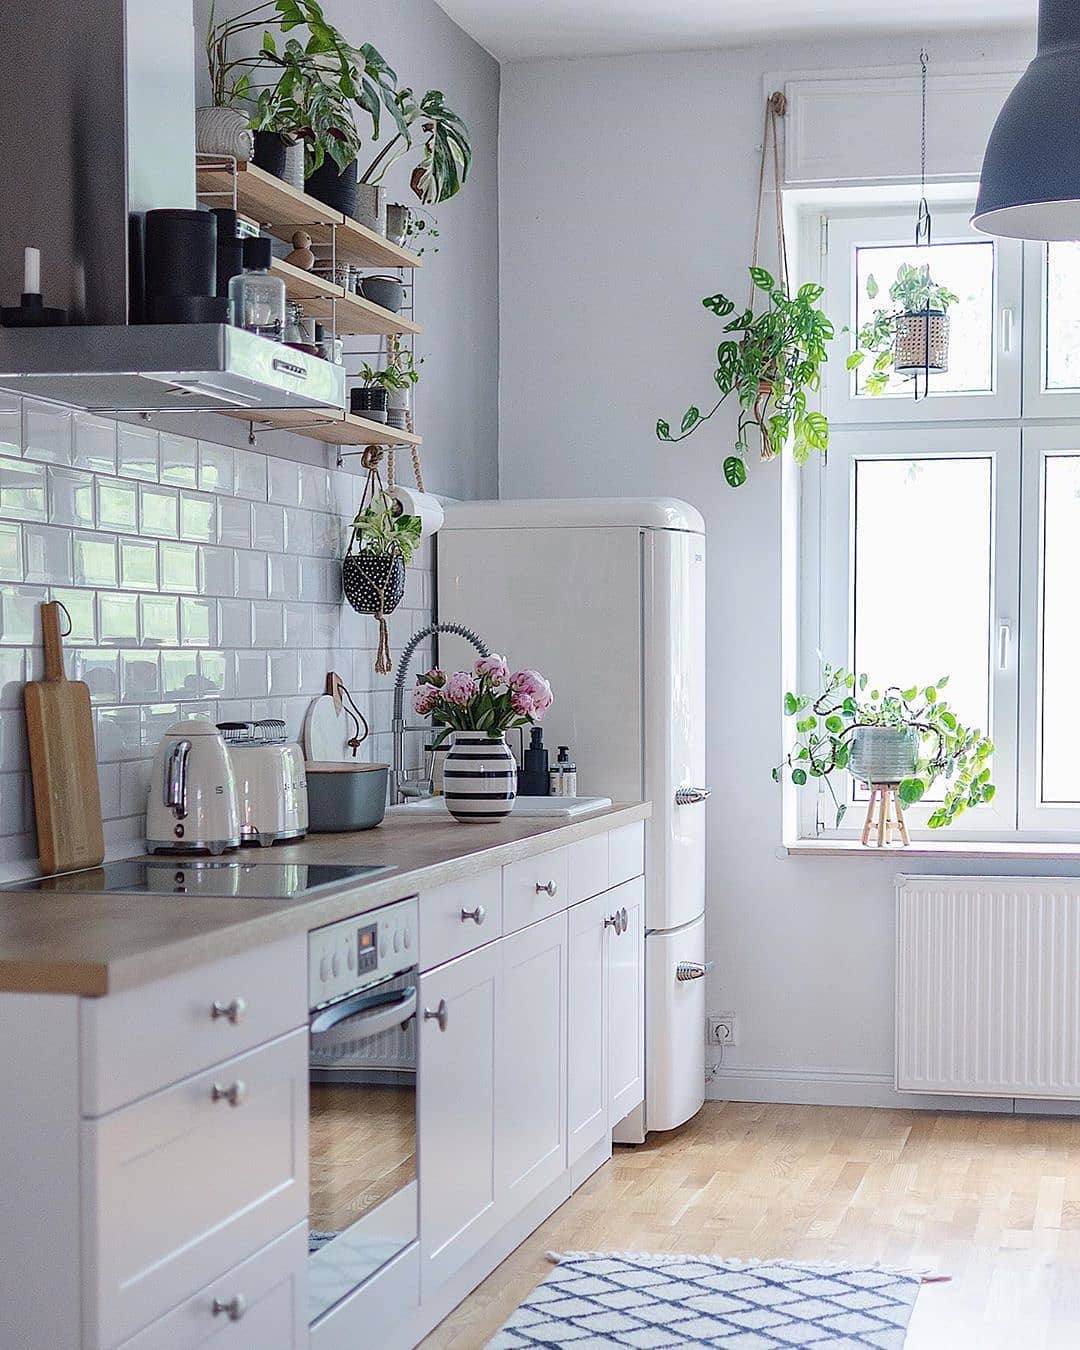 Scandinavian Small Kitchen Design Ideas From The Experts   Decoholic